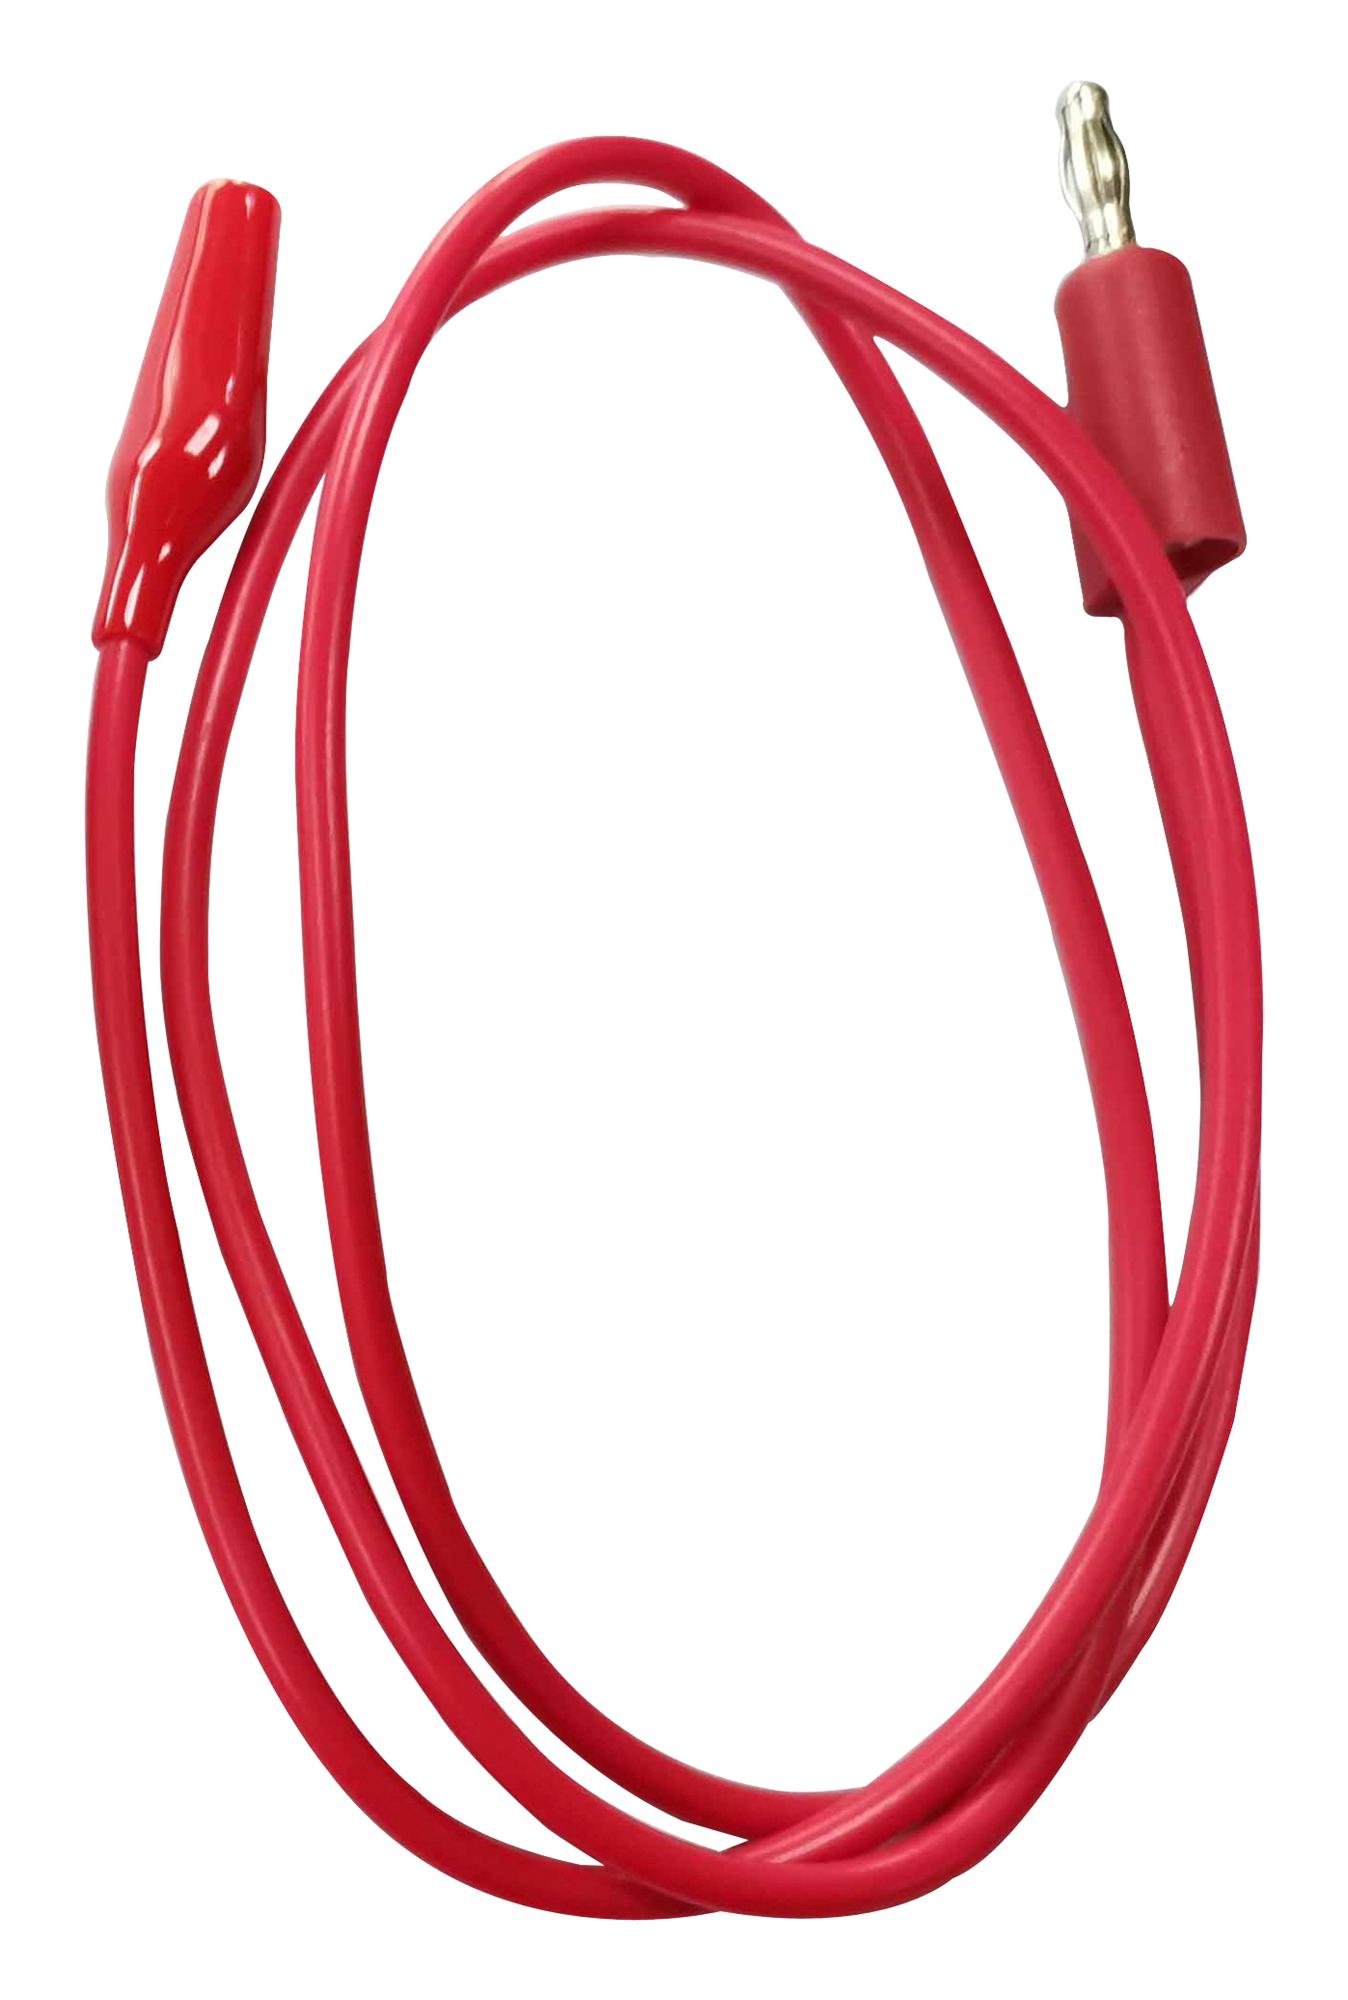 MP770275 TEST LEAD, 5A, 60V, 610MM, RED MULTICOMP PRO